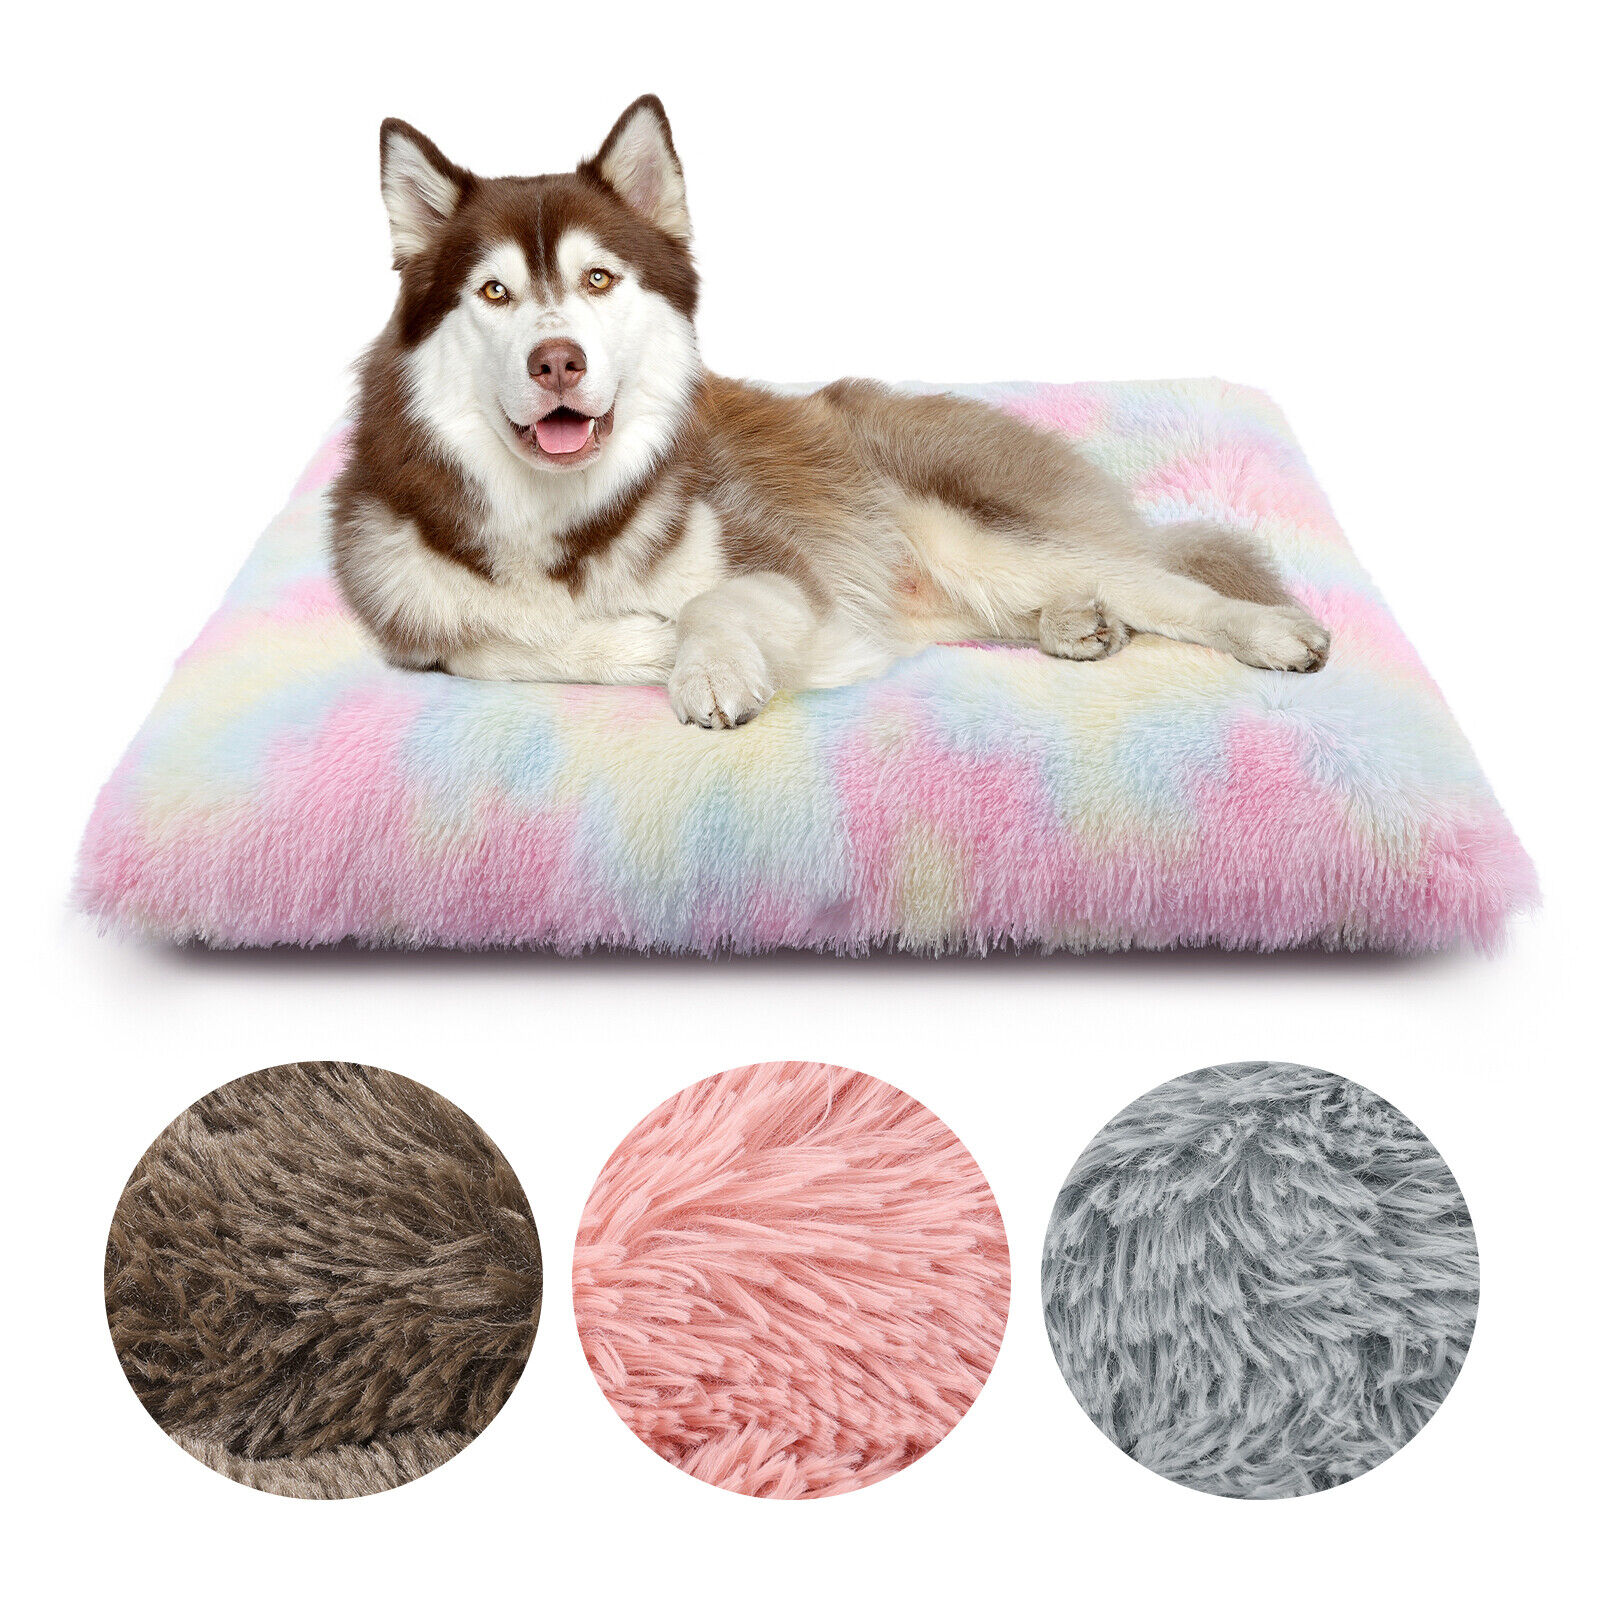 Pet Dog Cat Bed Warm Plush Cuddler Soft Puppy Calming Bed Kennel Crate Cushion